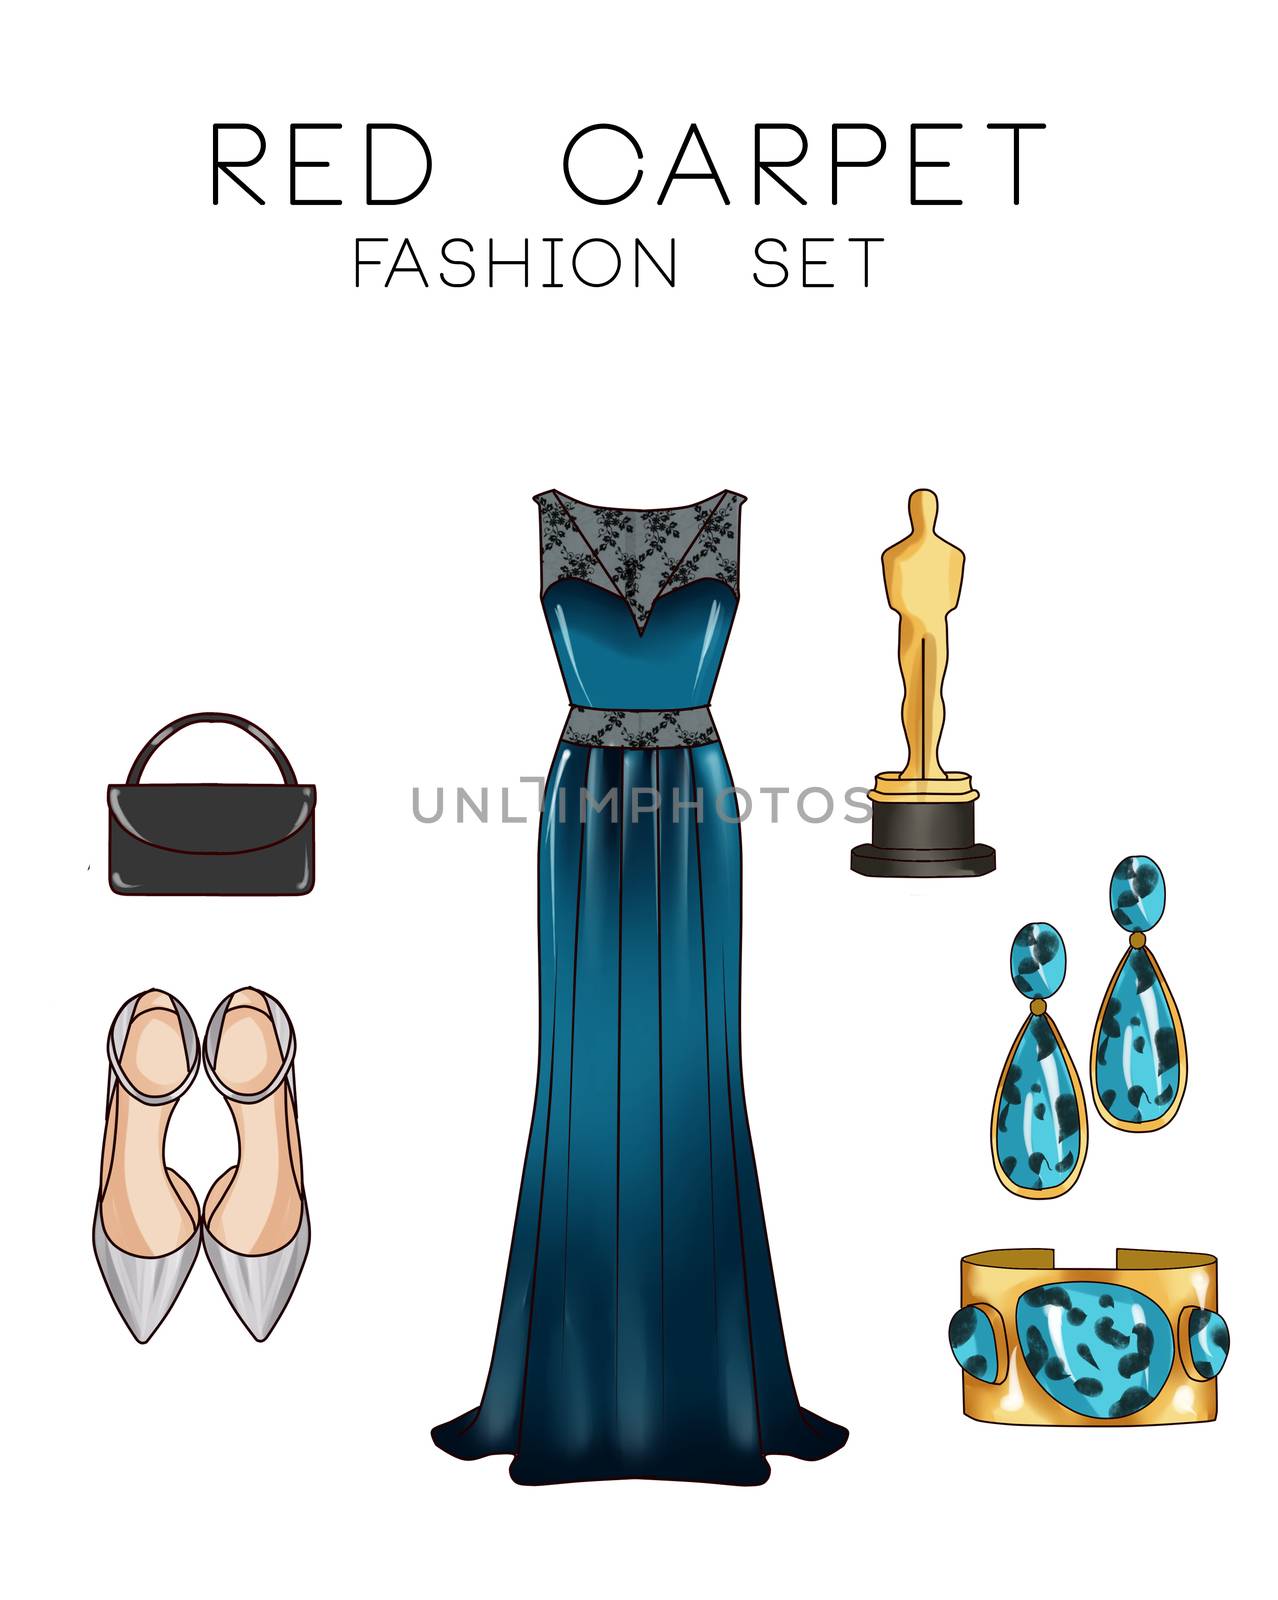 Fashion set of woman's clothes and accessories - Formal dress , shoes, jewels, purse by GGillustrations